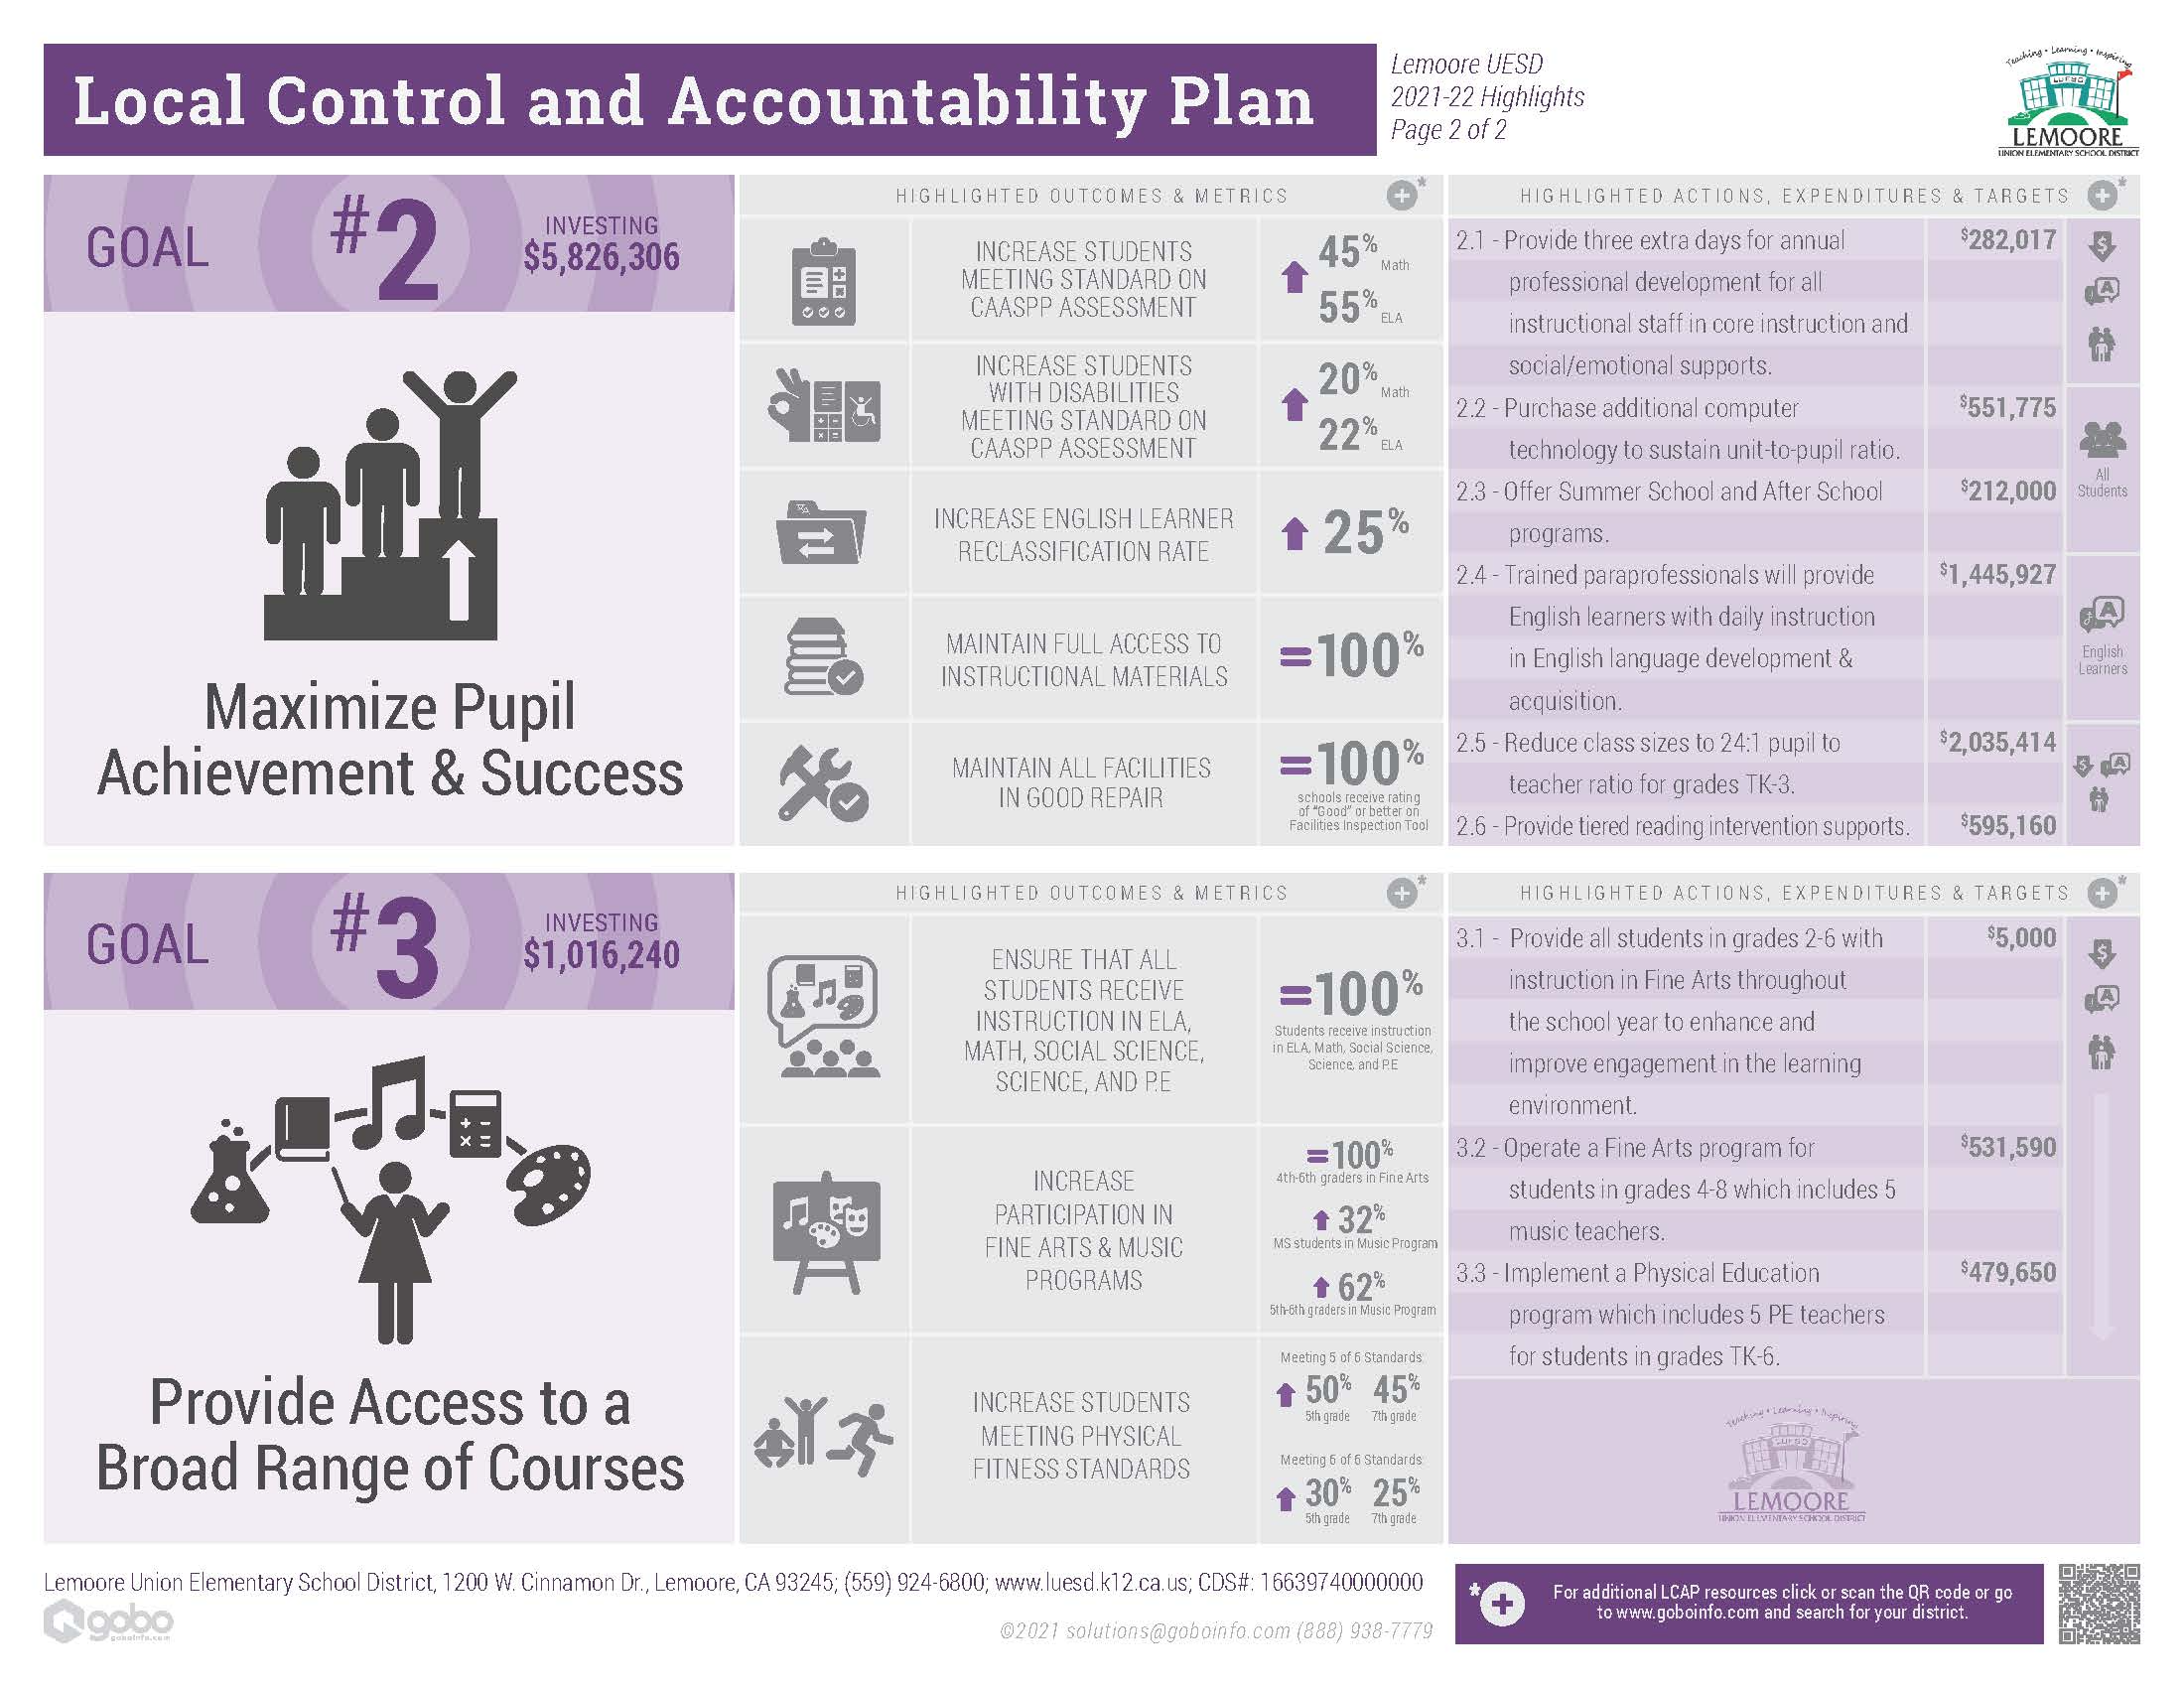 Local Control and Accountability Plan